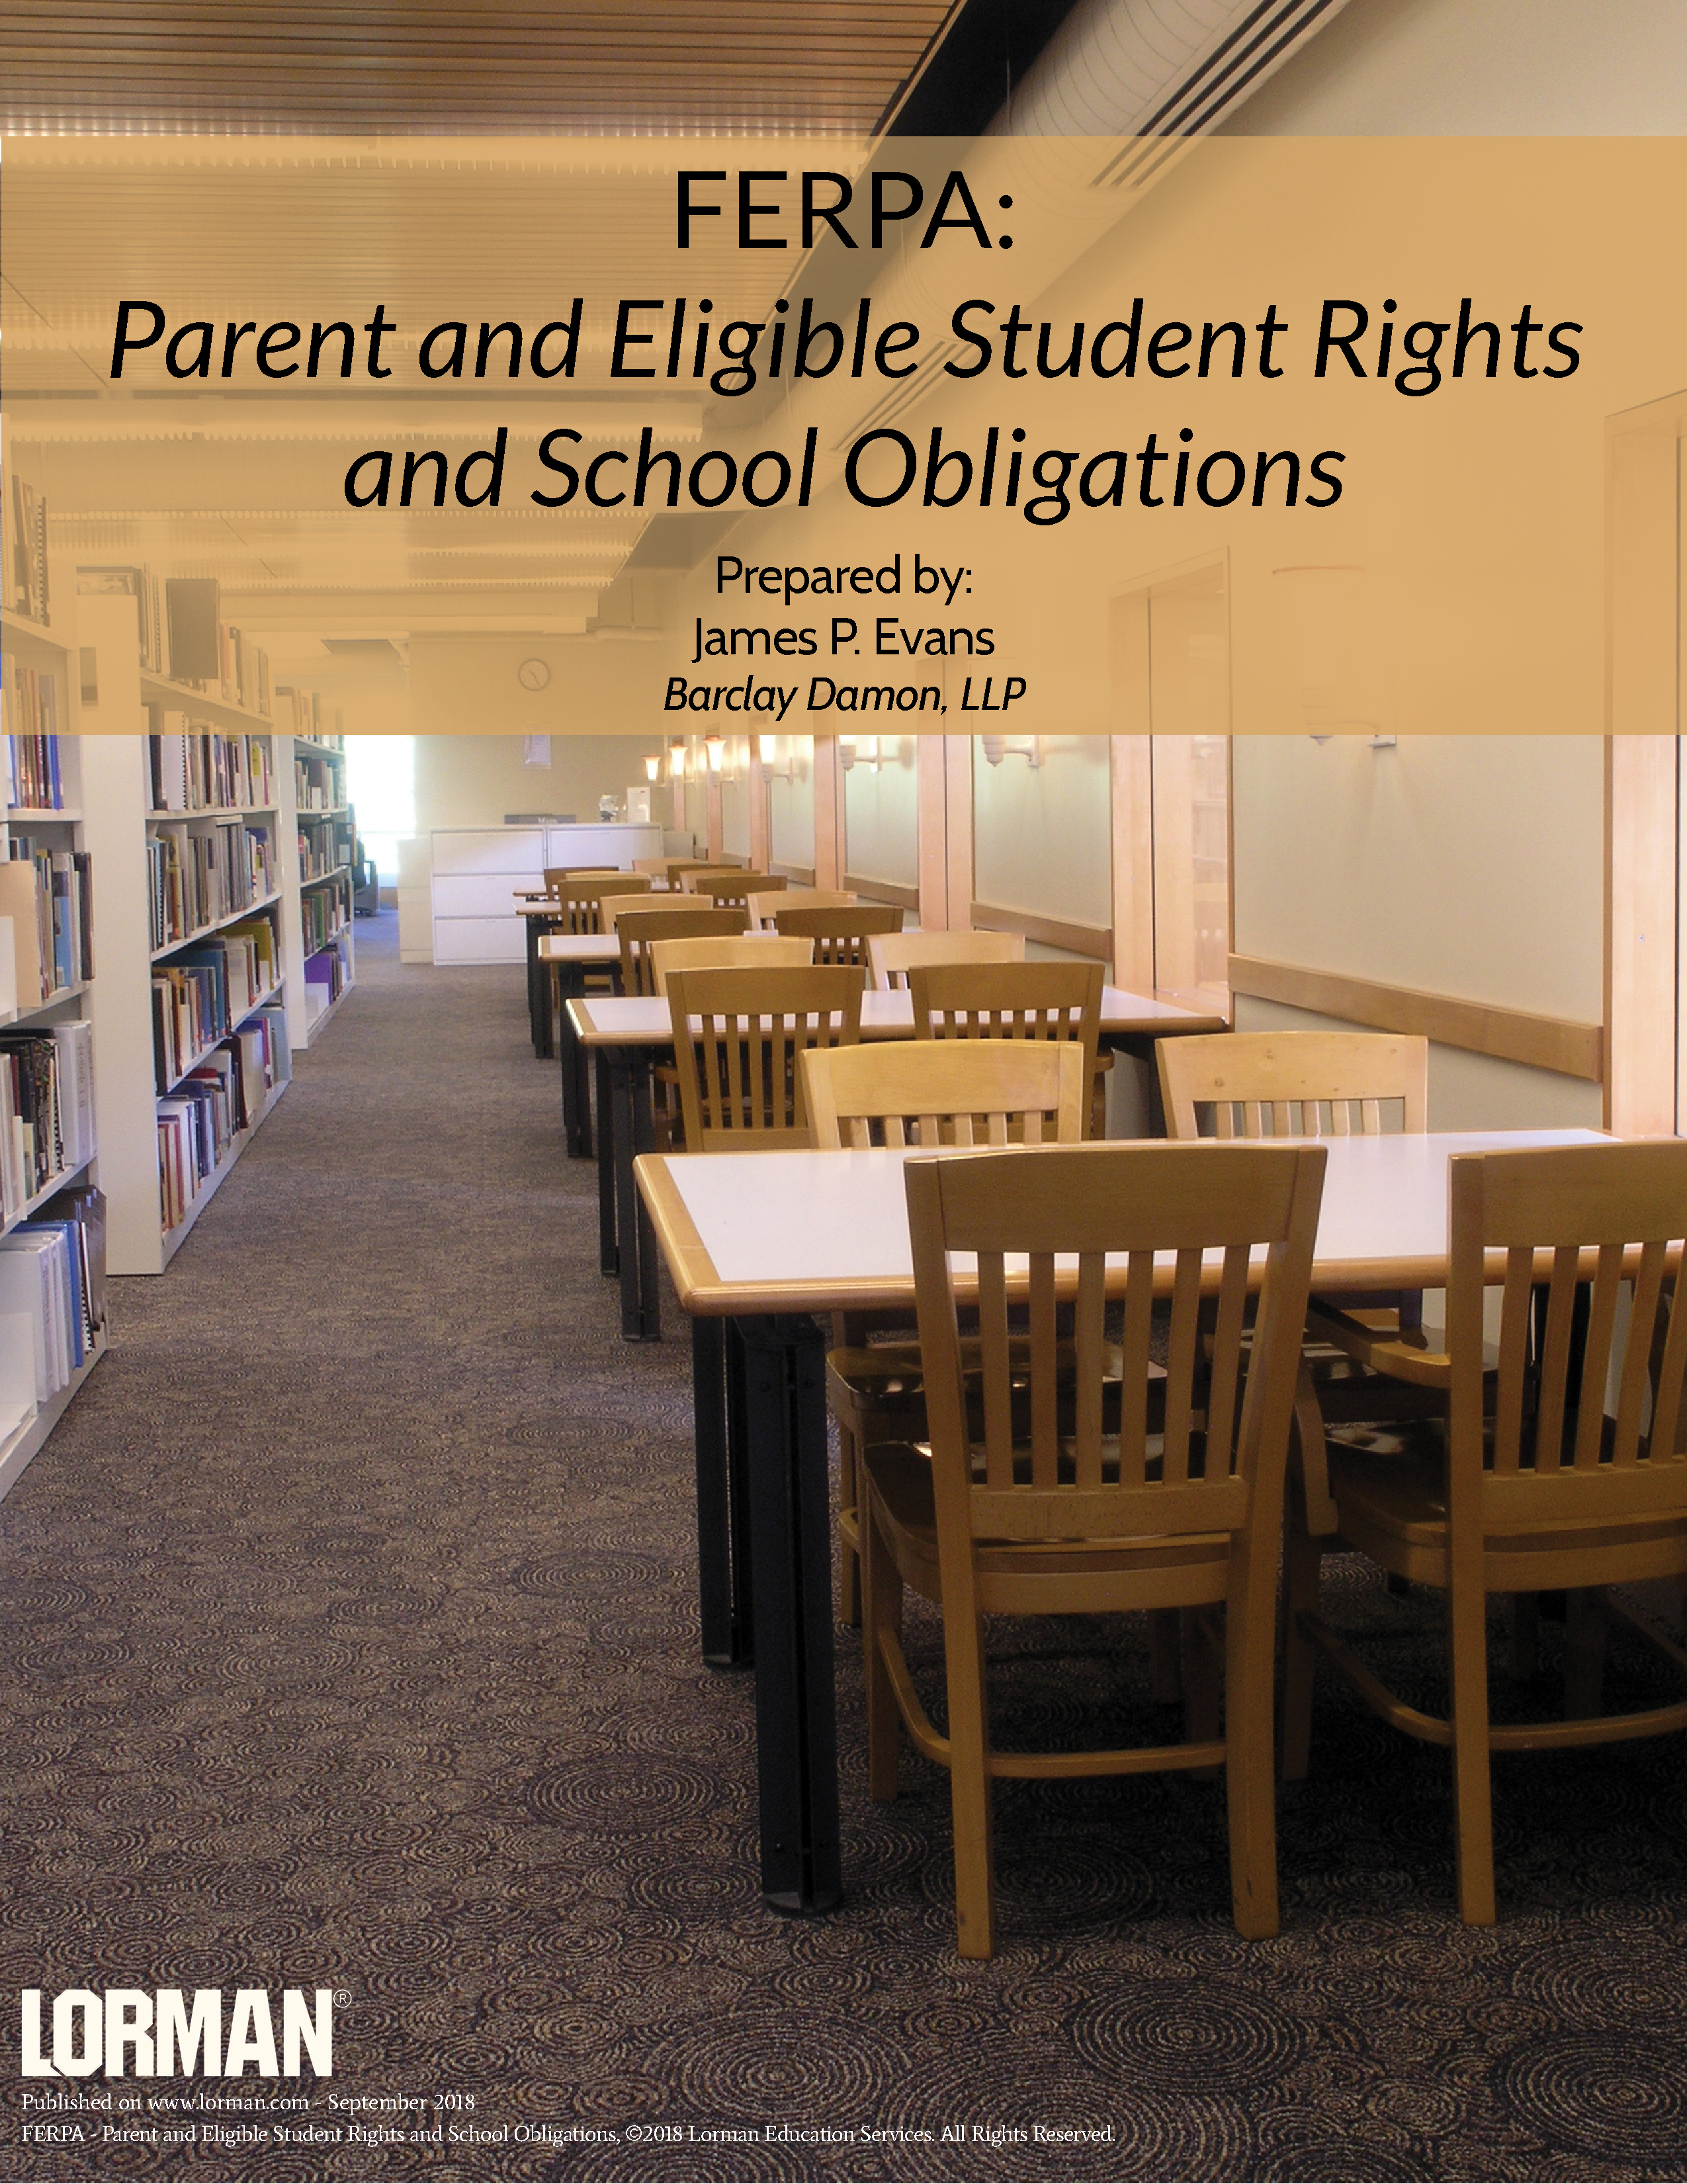 FERPA - Parent and Eligible Student Rights and School Obligations